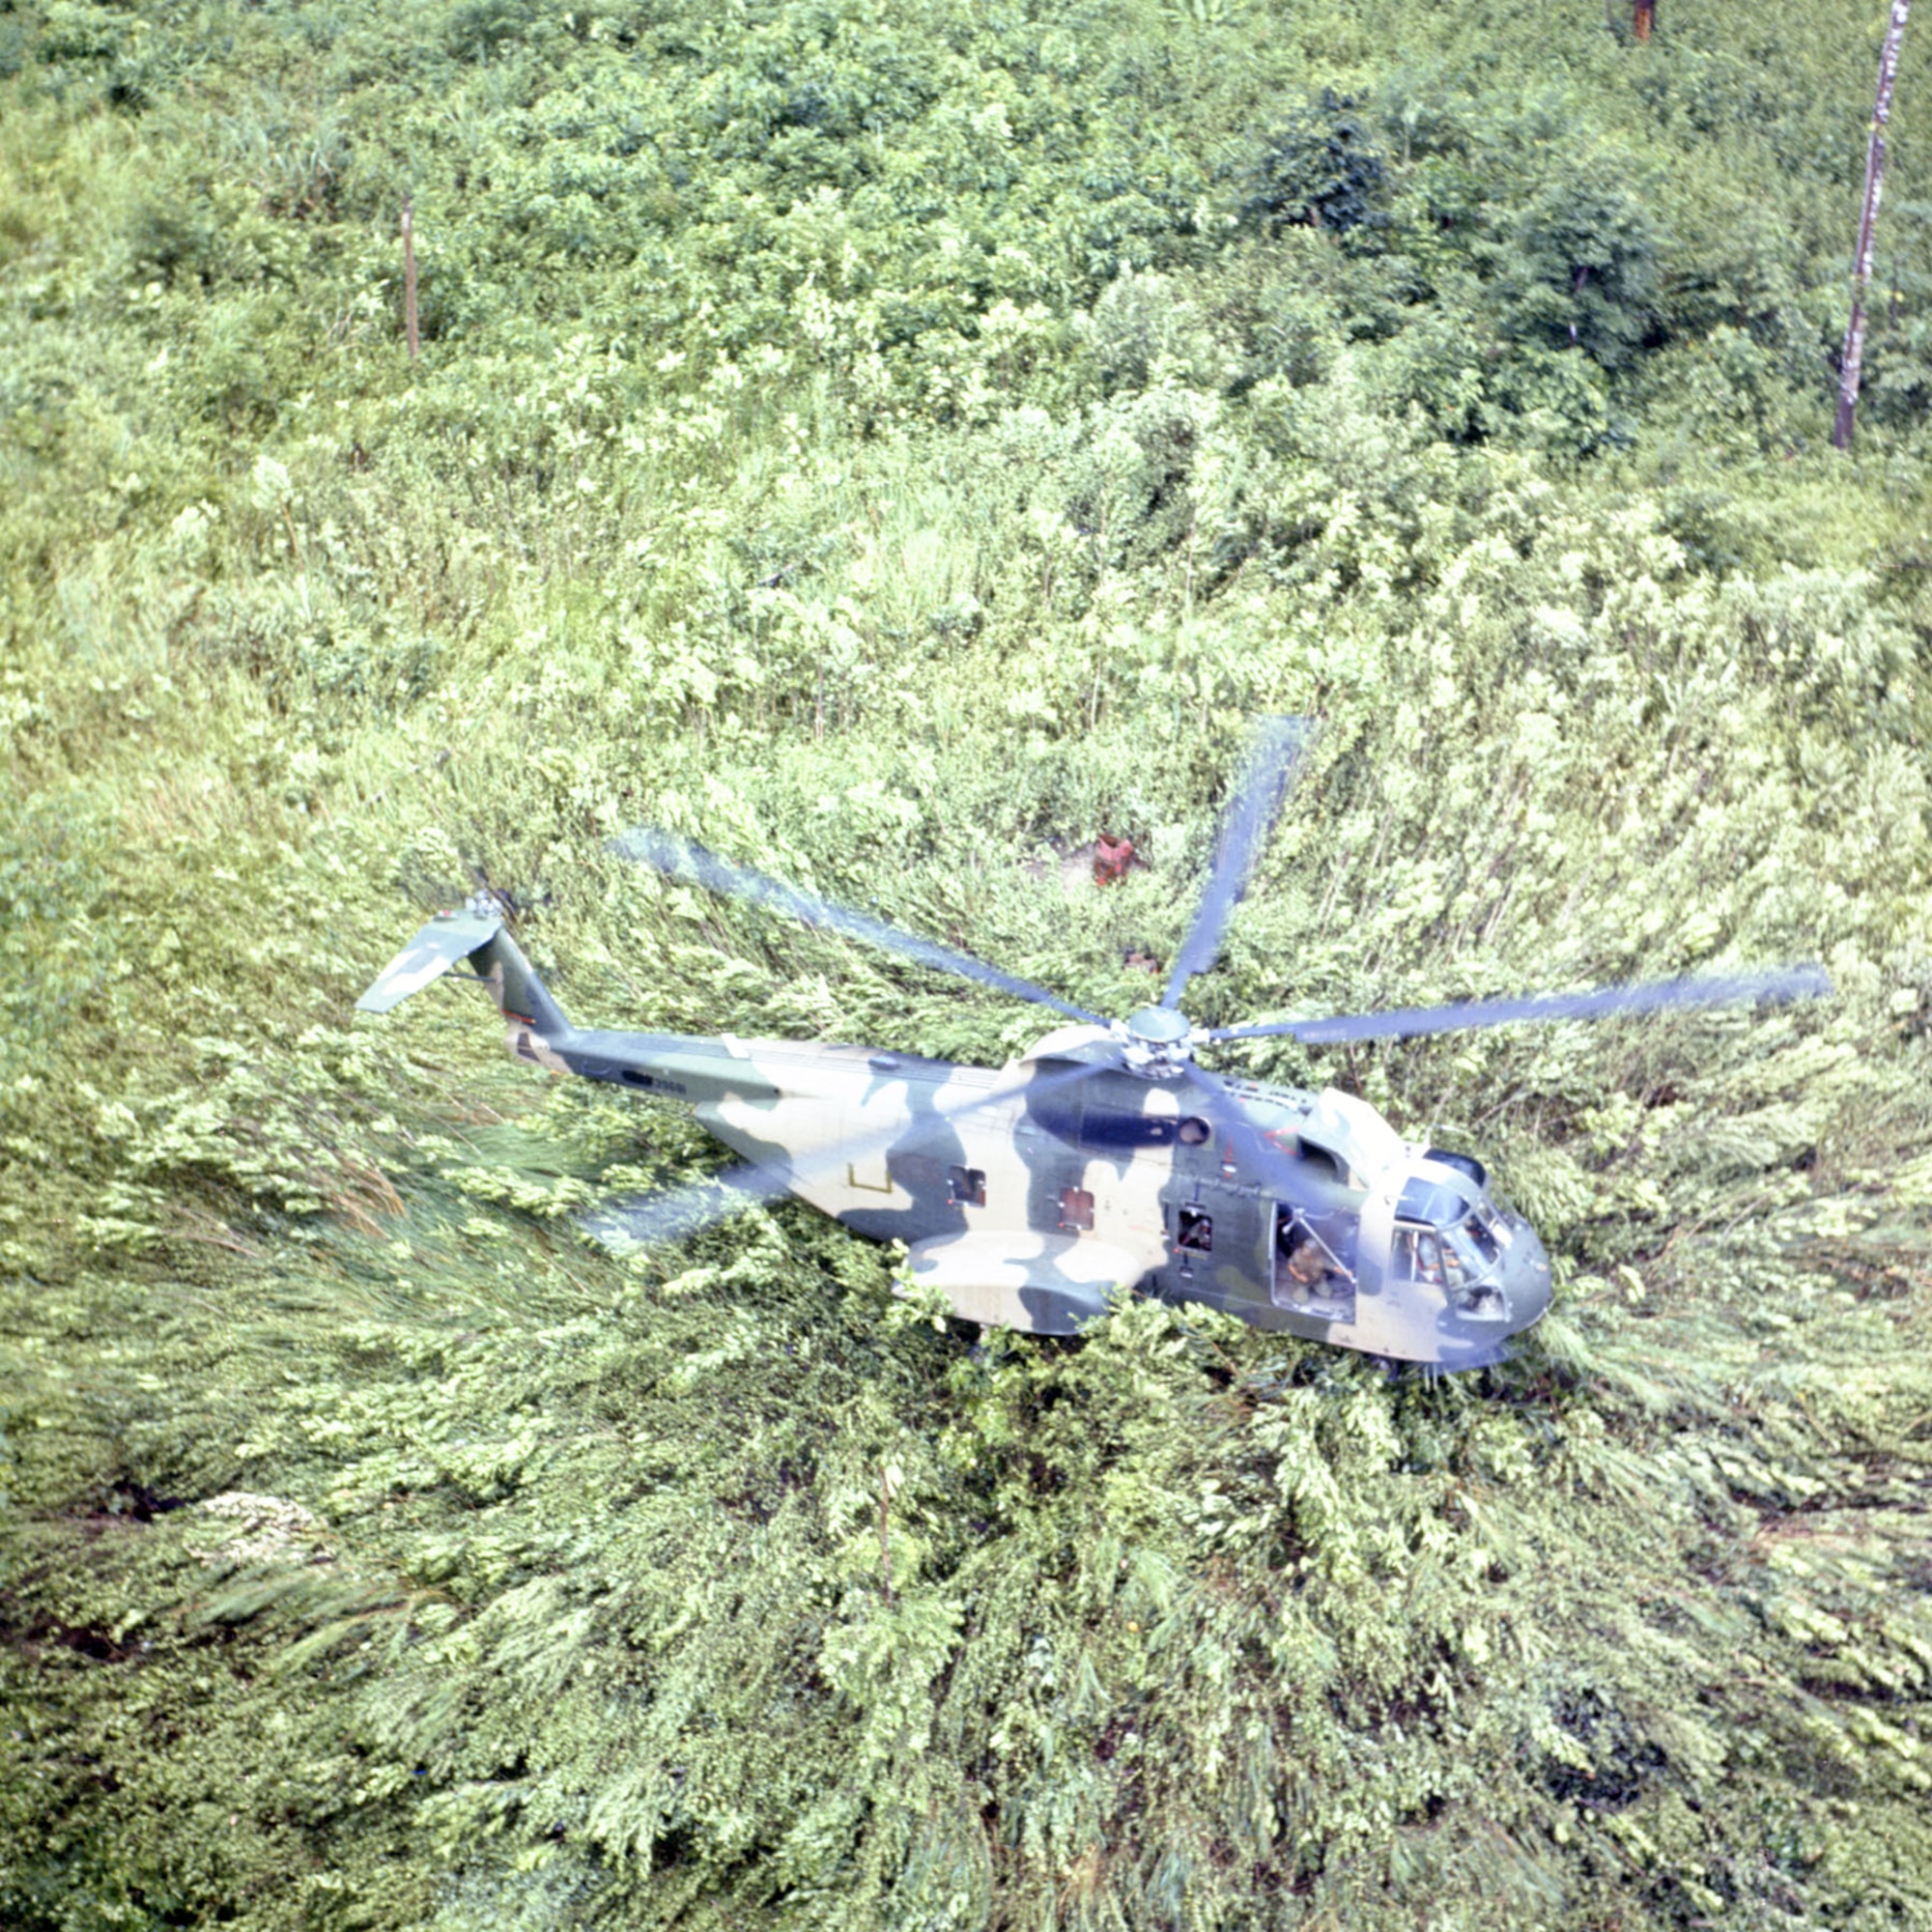 CH-3E Jolly Green Giant in Southeast Asia. (U.S. Air Force photo)